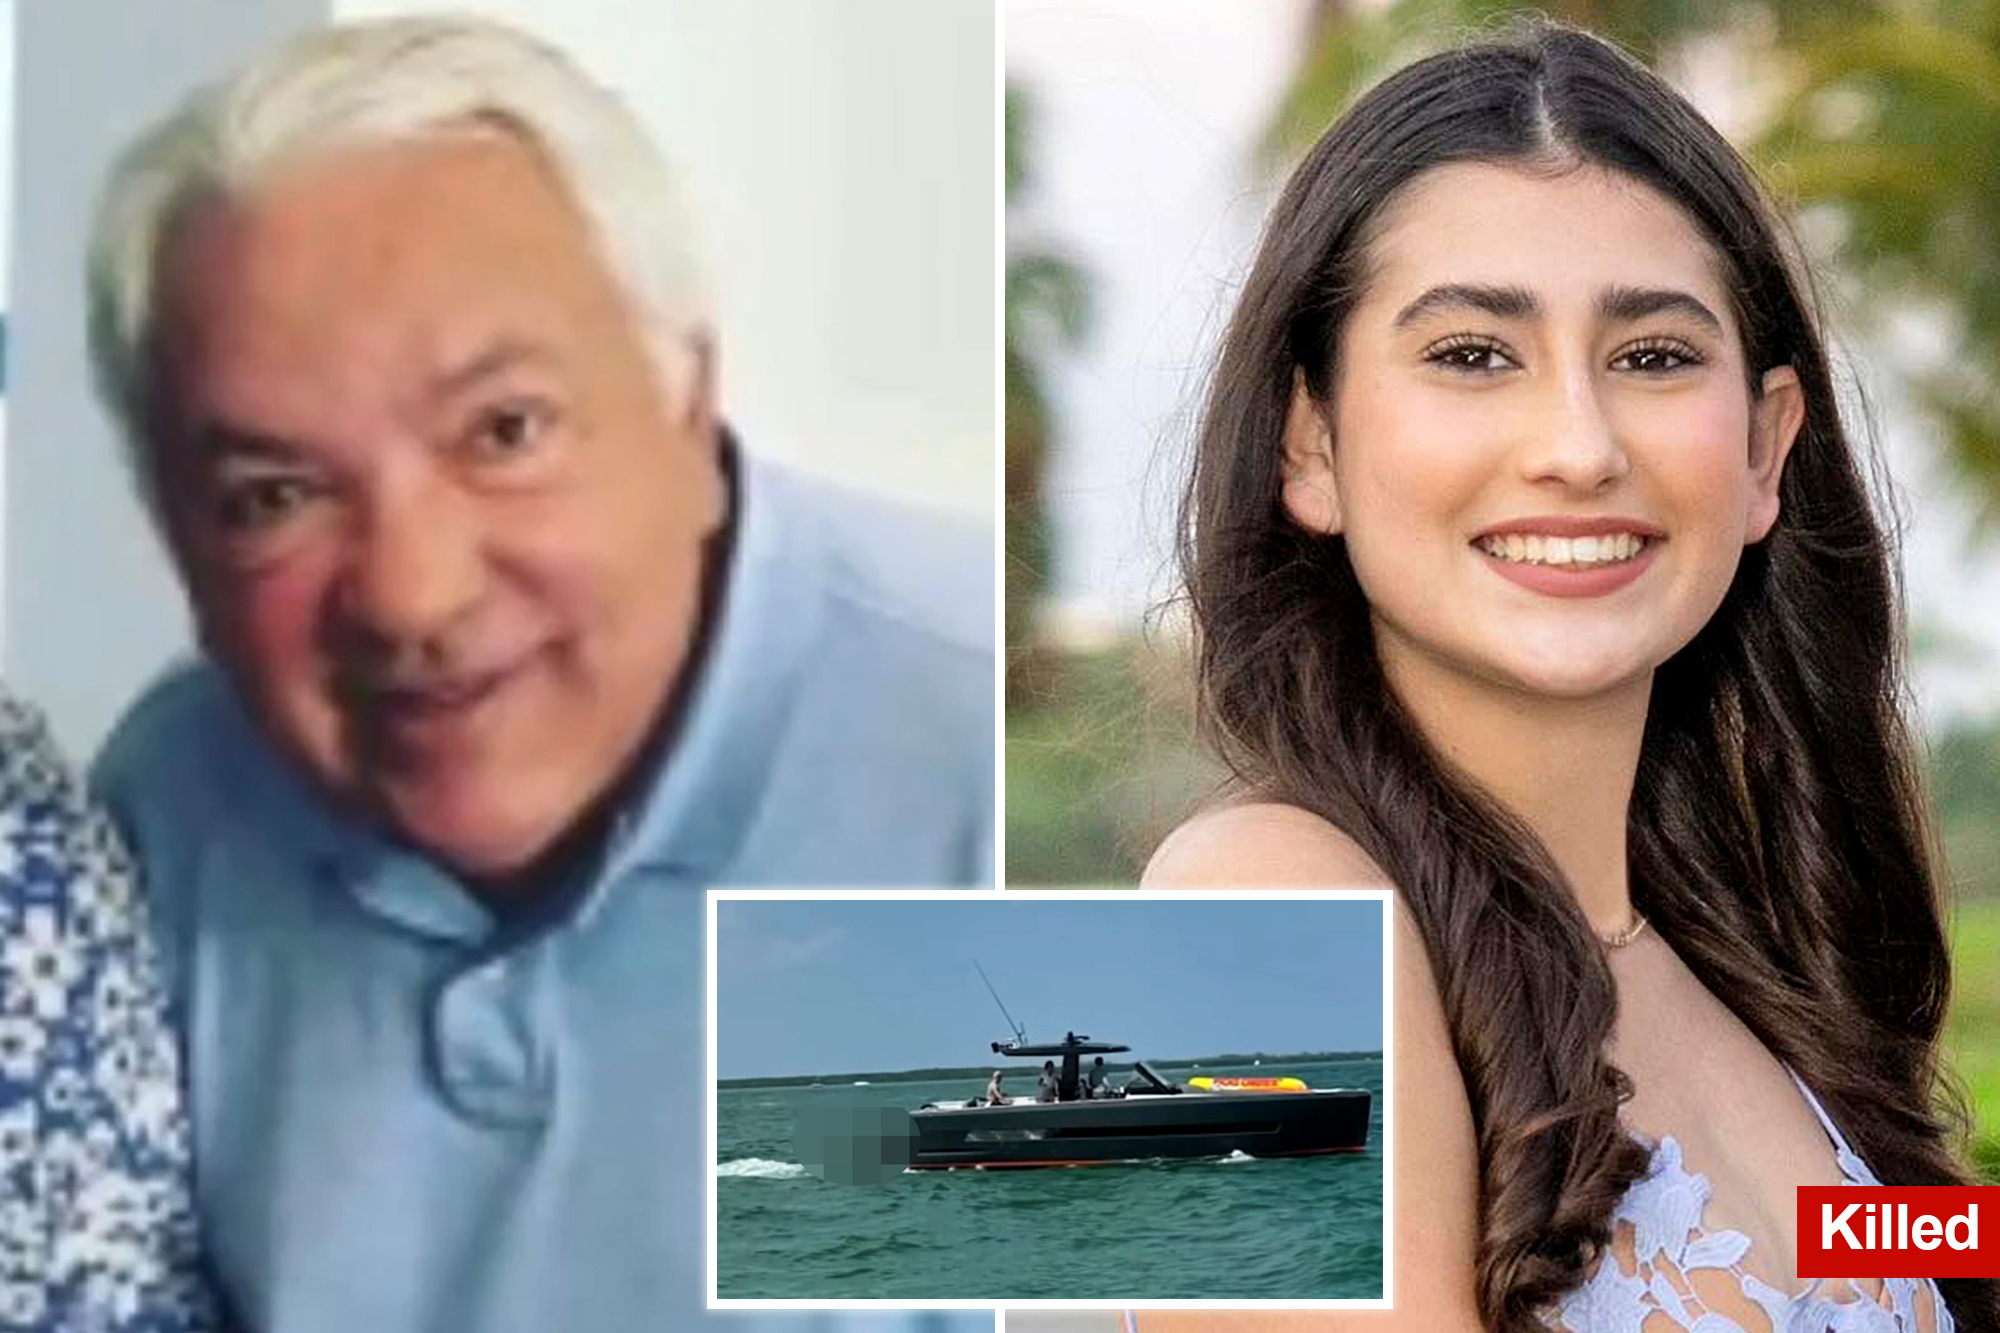 Florida boater suspected in fatal hit-and-run of teen ballerina ID'd as 78-year-old